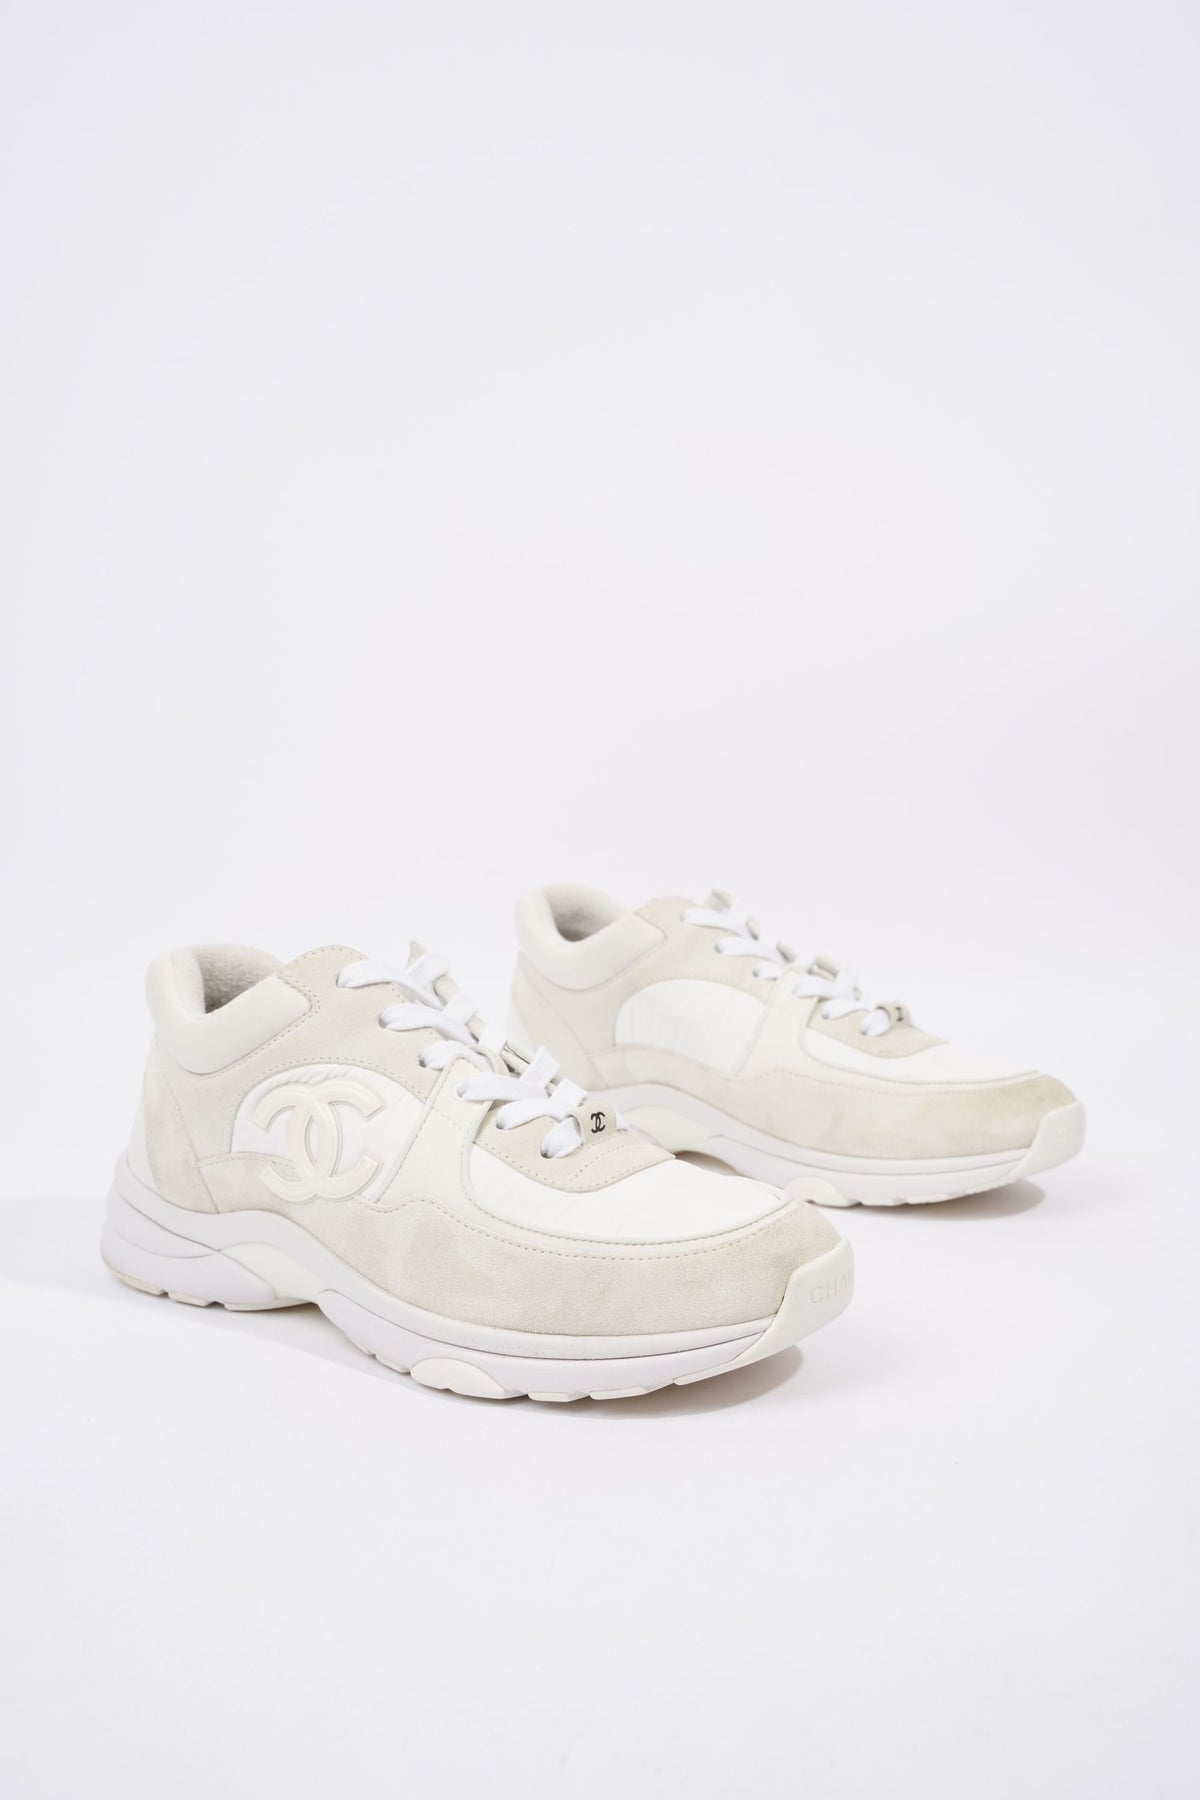 Chanel Womens CC Runners White / Cream EU 38.5 / UK 5.5 – Luxe Collective